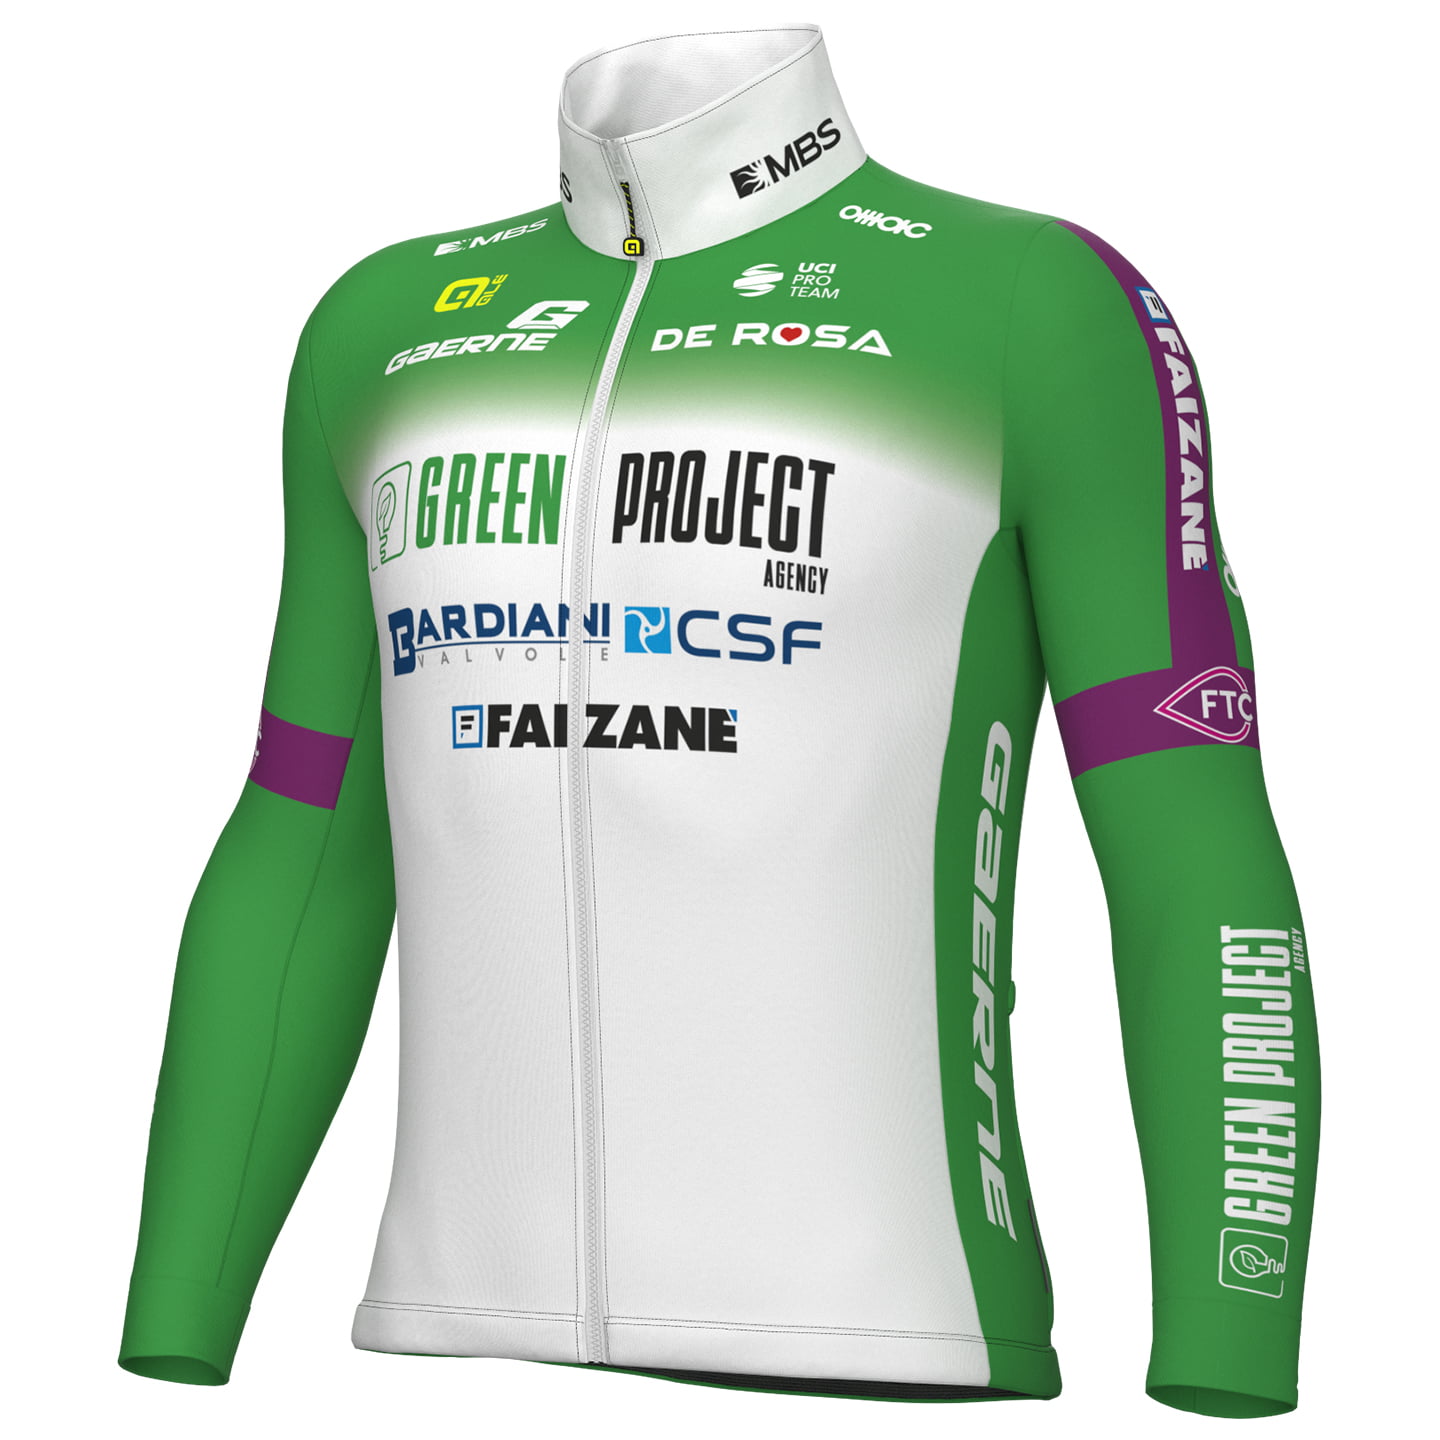 GREEN PROJECT-BARDIANI CSF-FAIZANE 2023 Thermal Jacket, for men, size M, Winter jacket, Cycle clothing